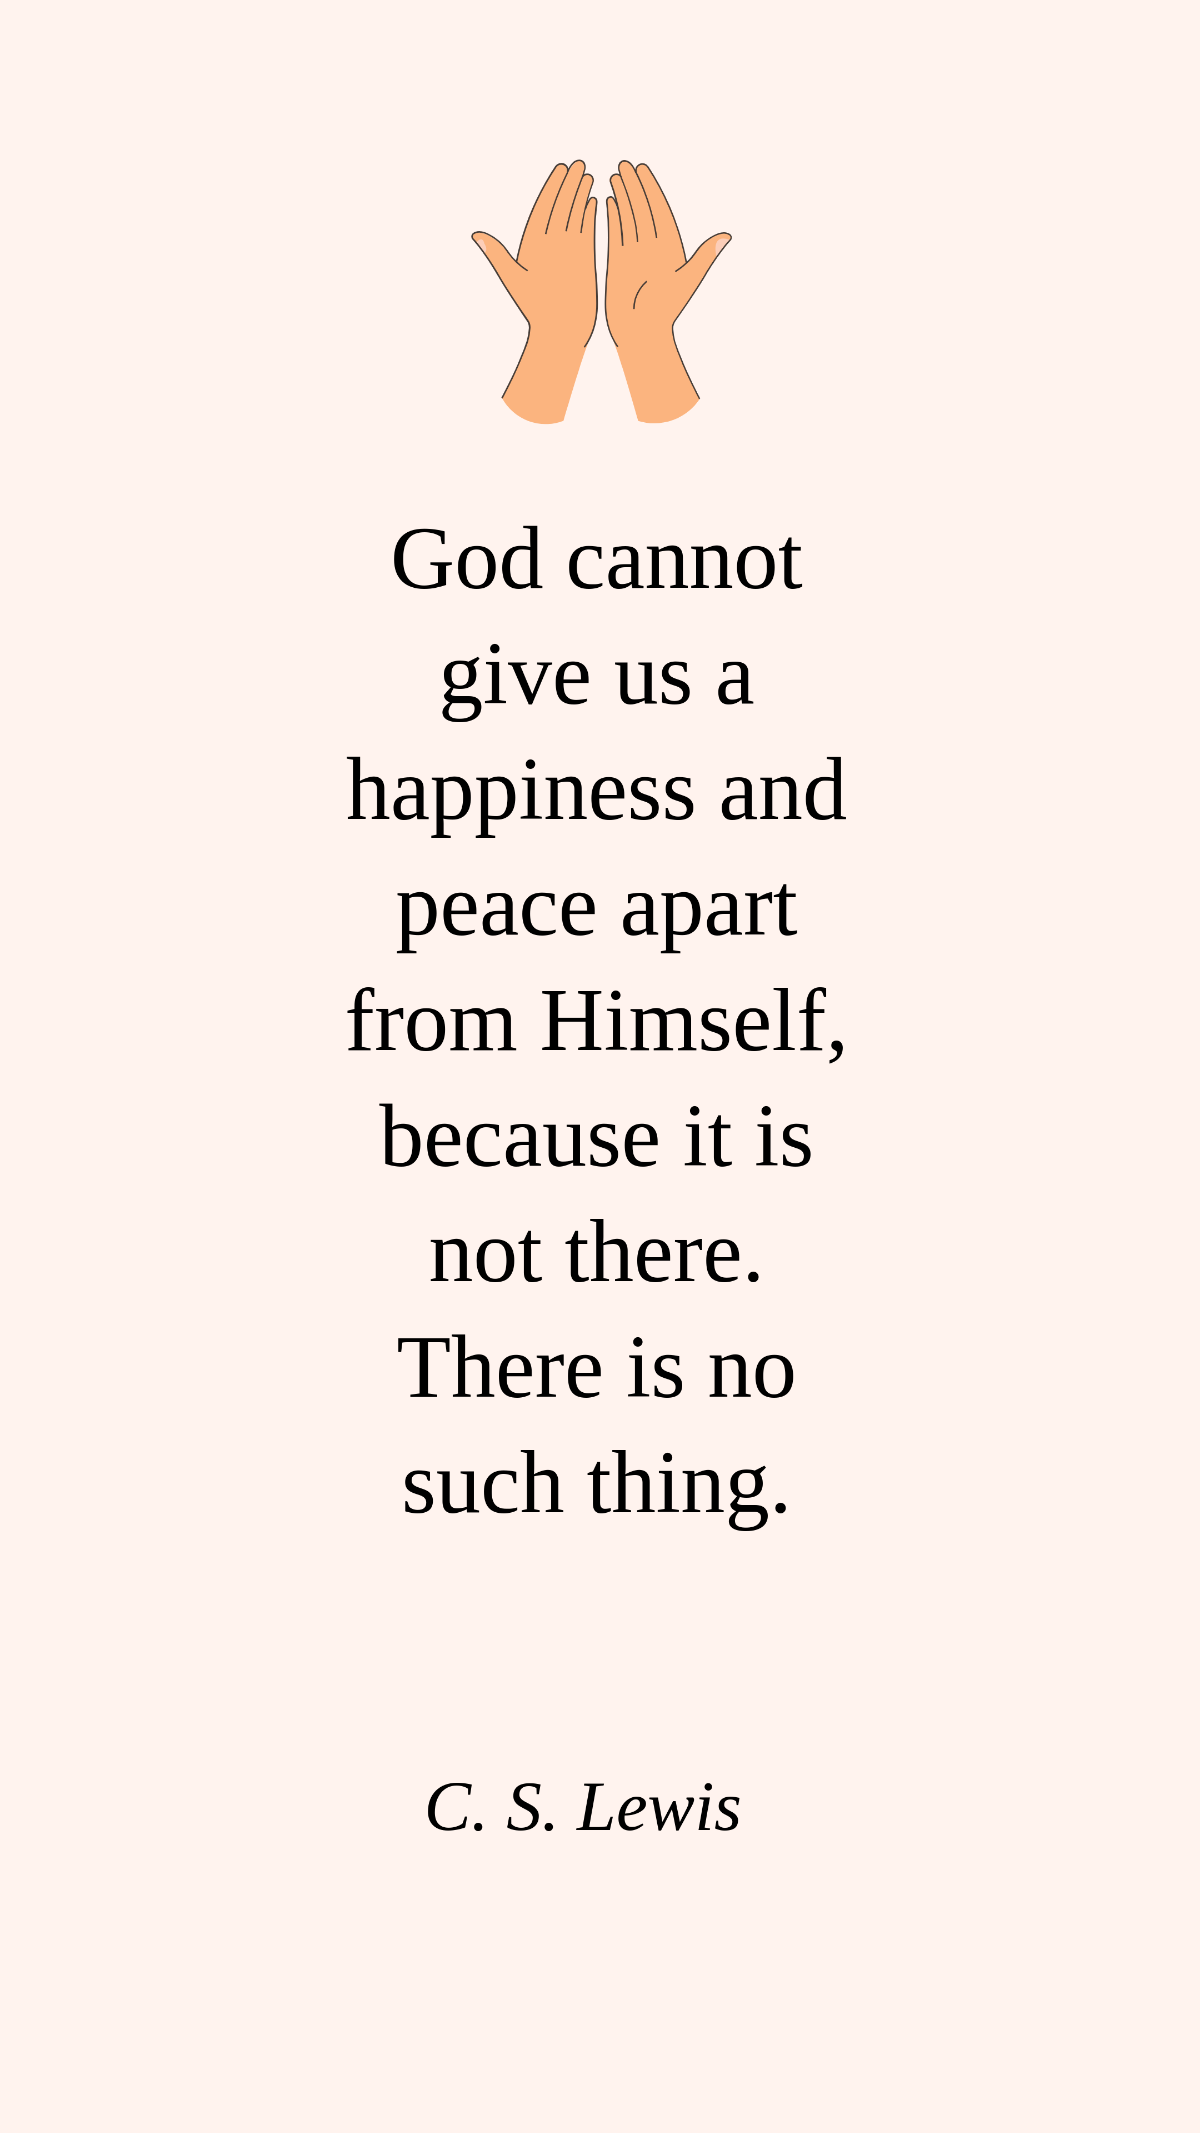 Free C. S. Lewis - God cannot give us a happiness and peace apart from Himself, because it is not there. There is no such thing.  Template